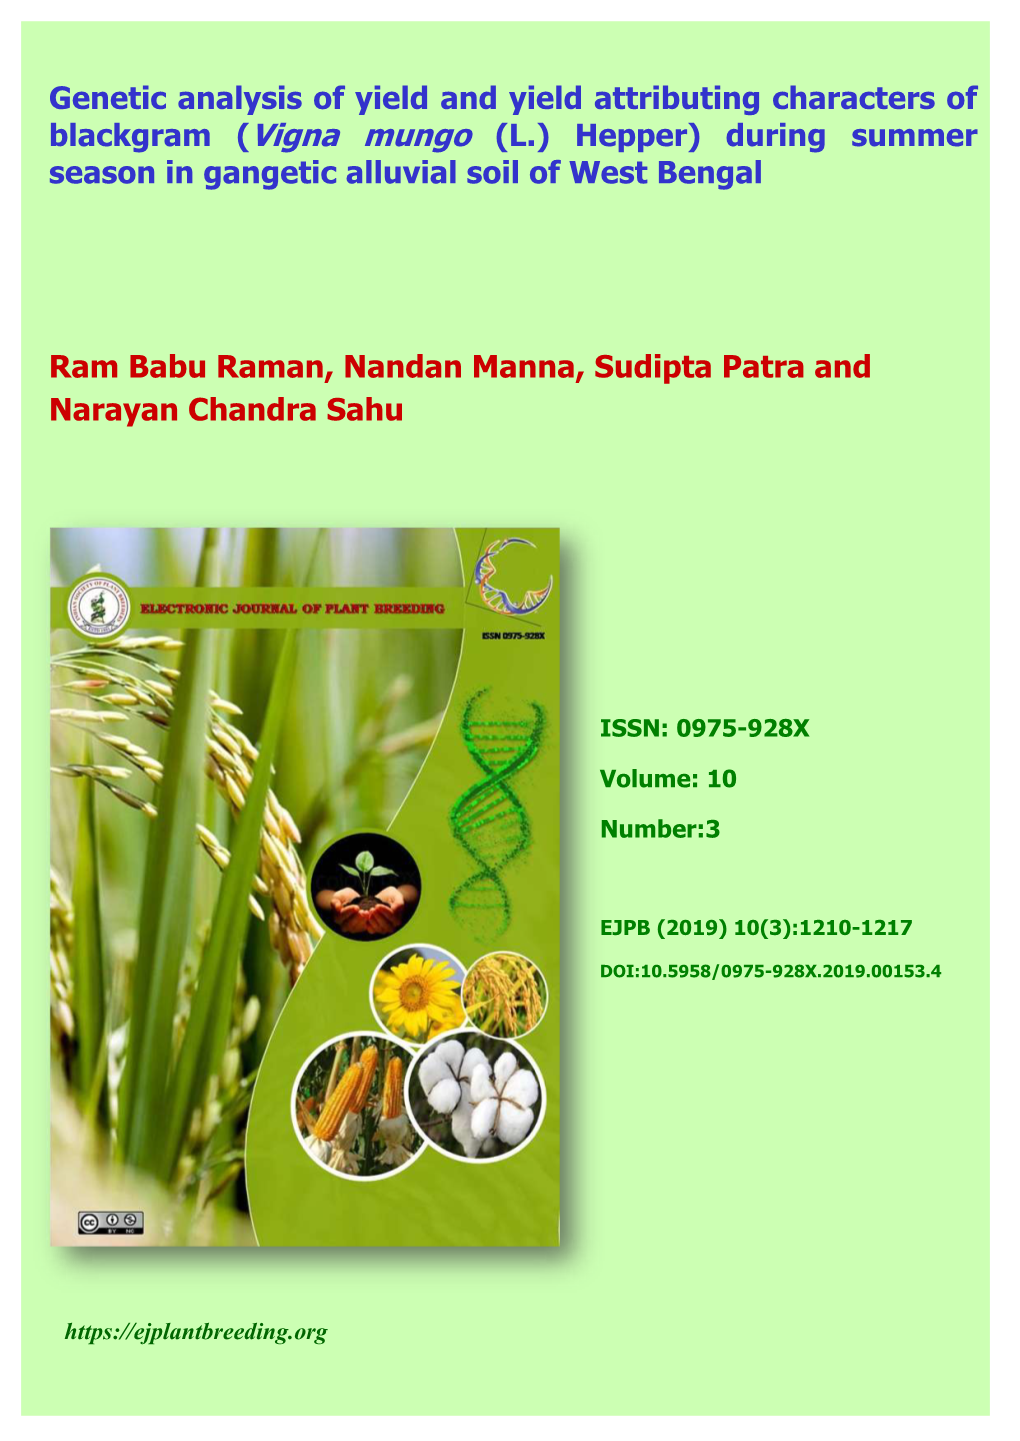 Genetic Analysis of Yield and Yield Attributing Characters of Blackgram (Vigna Mungo (L.) Hepper) During Summer Season in Gangetic Alluvial Soil of West Bengal